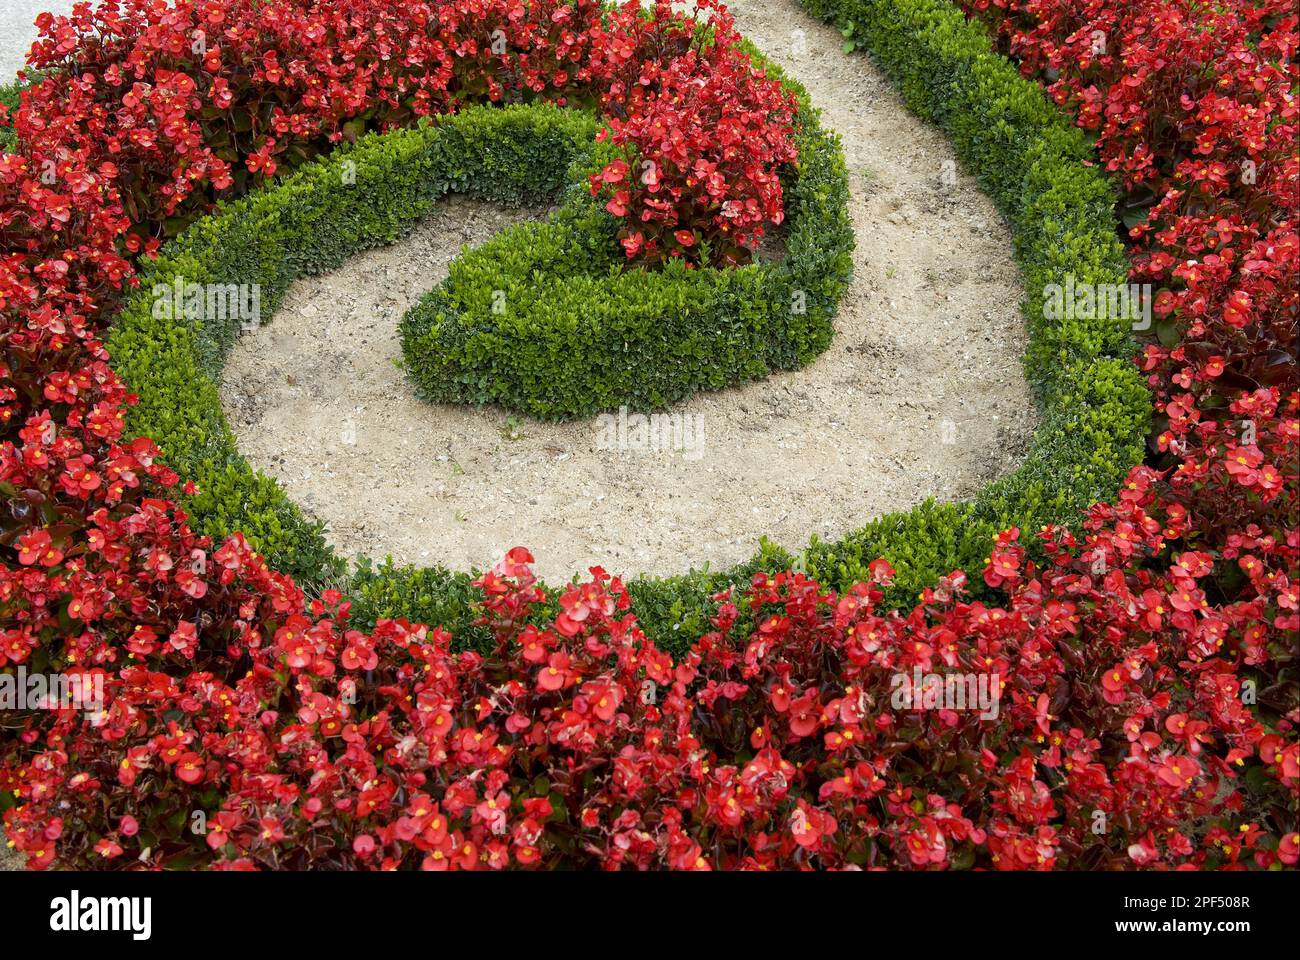 Box (Buxus sempervirens) decorative clipped low hedge, with Cultivated Begonia (Begonia sp.) flowers in garden, Egreville, Seine-et-Marne, France Stock Photo